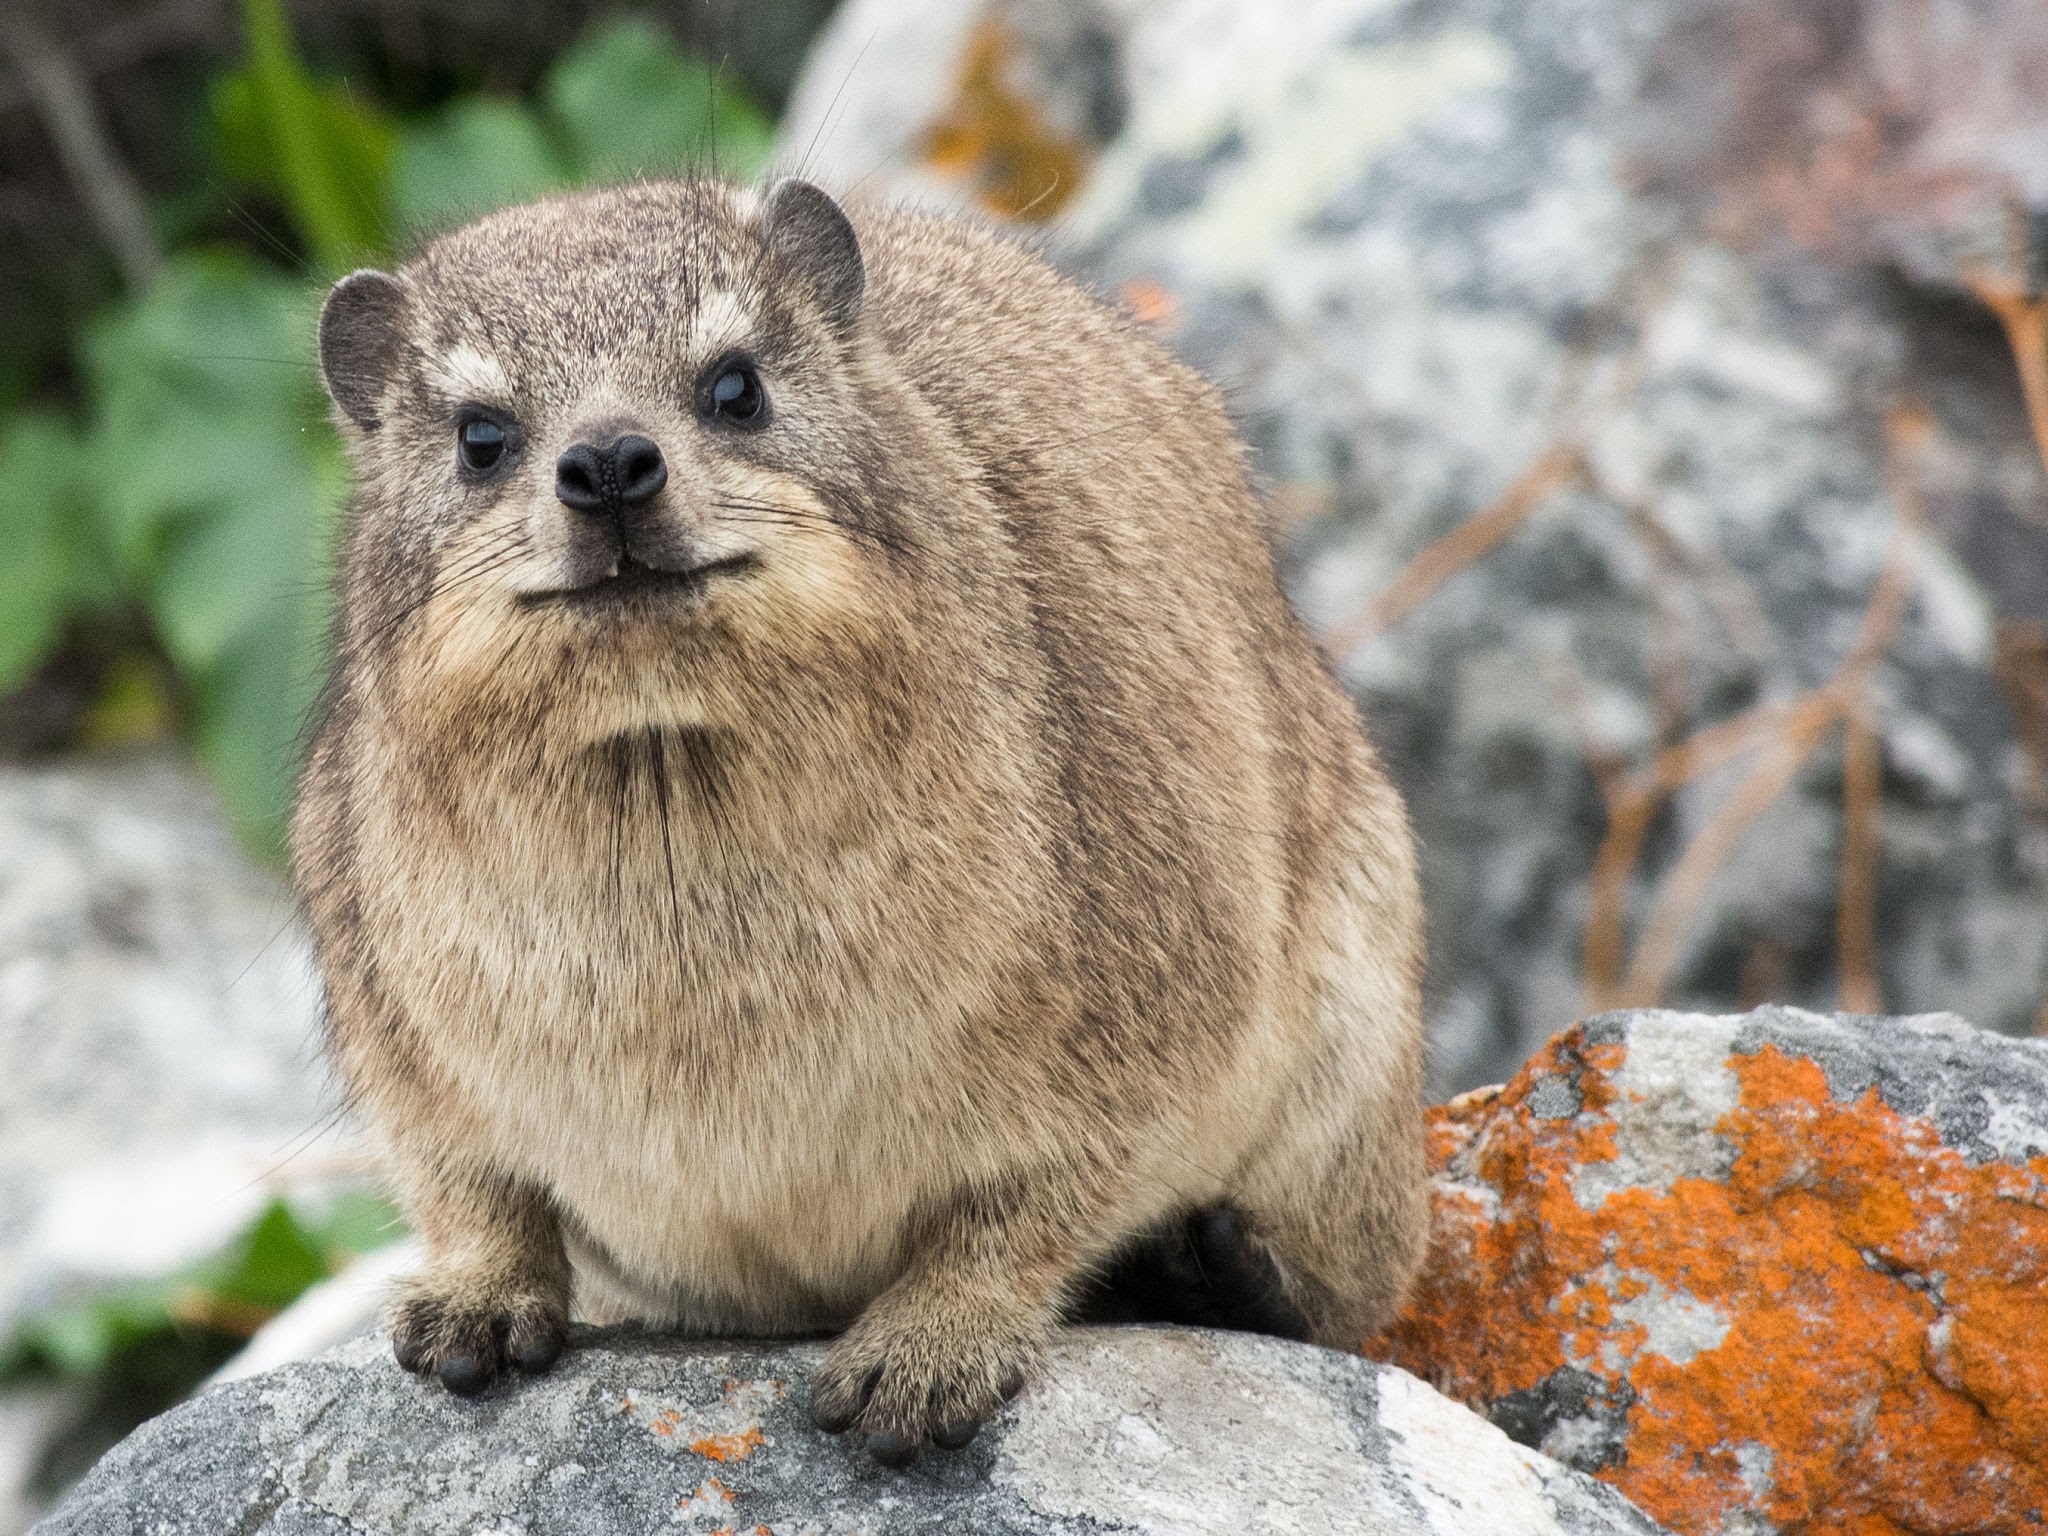 Curious rock hyrax in Tsitsikamma National Park, South Africa. Taken July 2015.